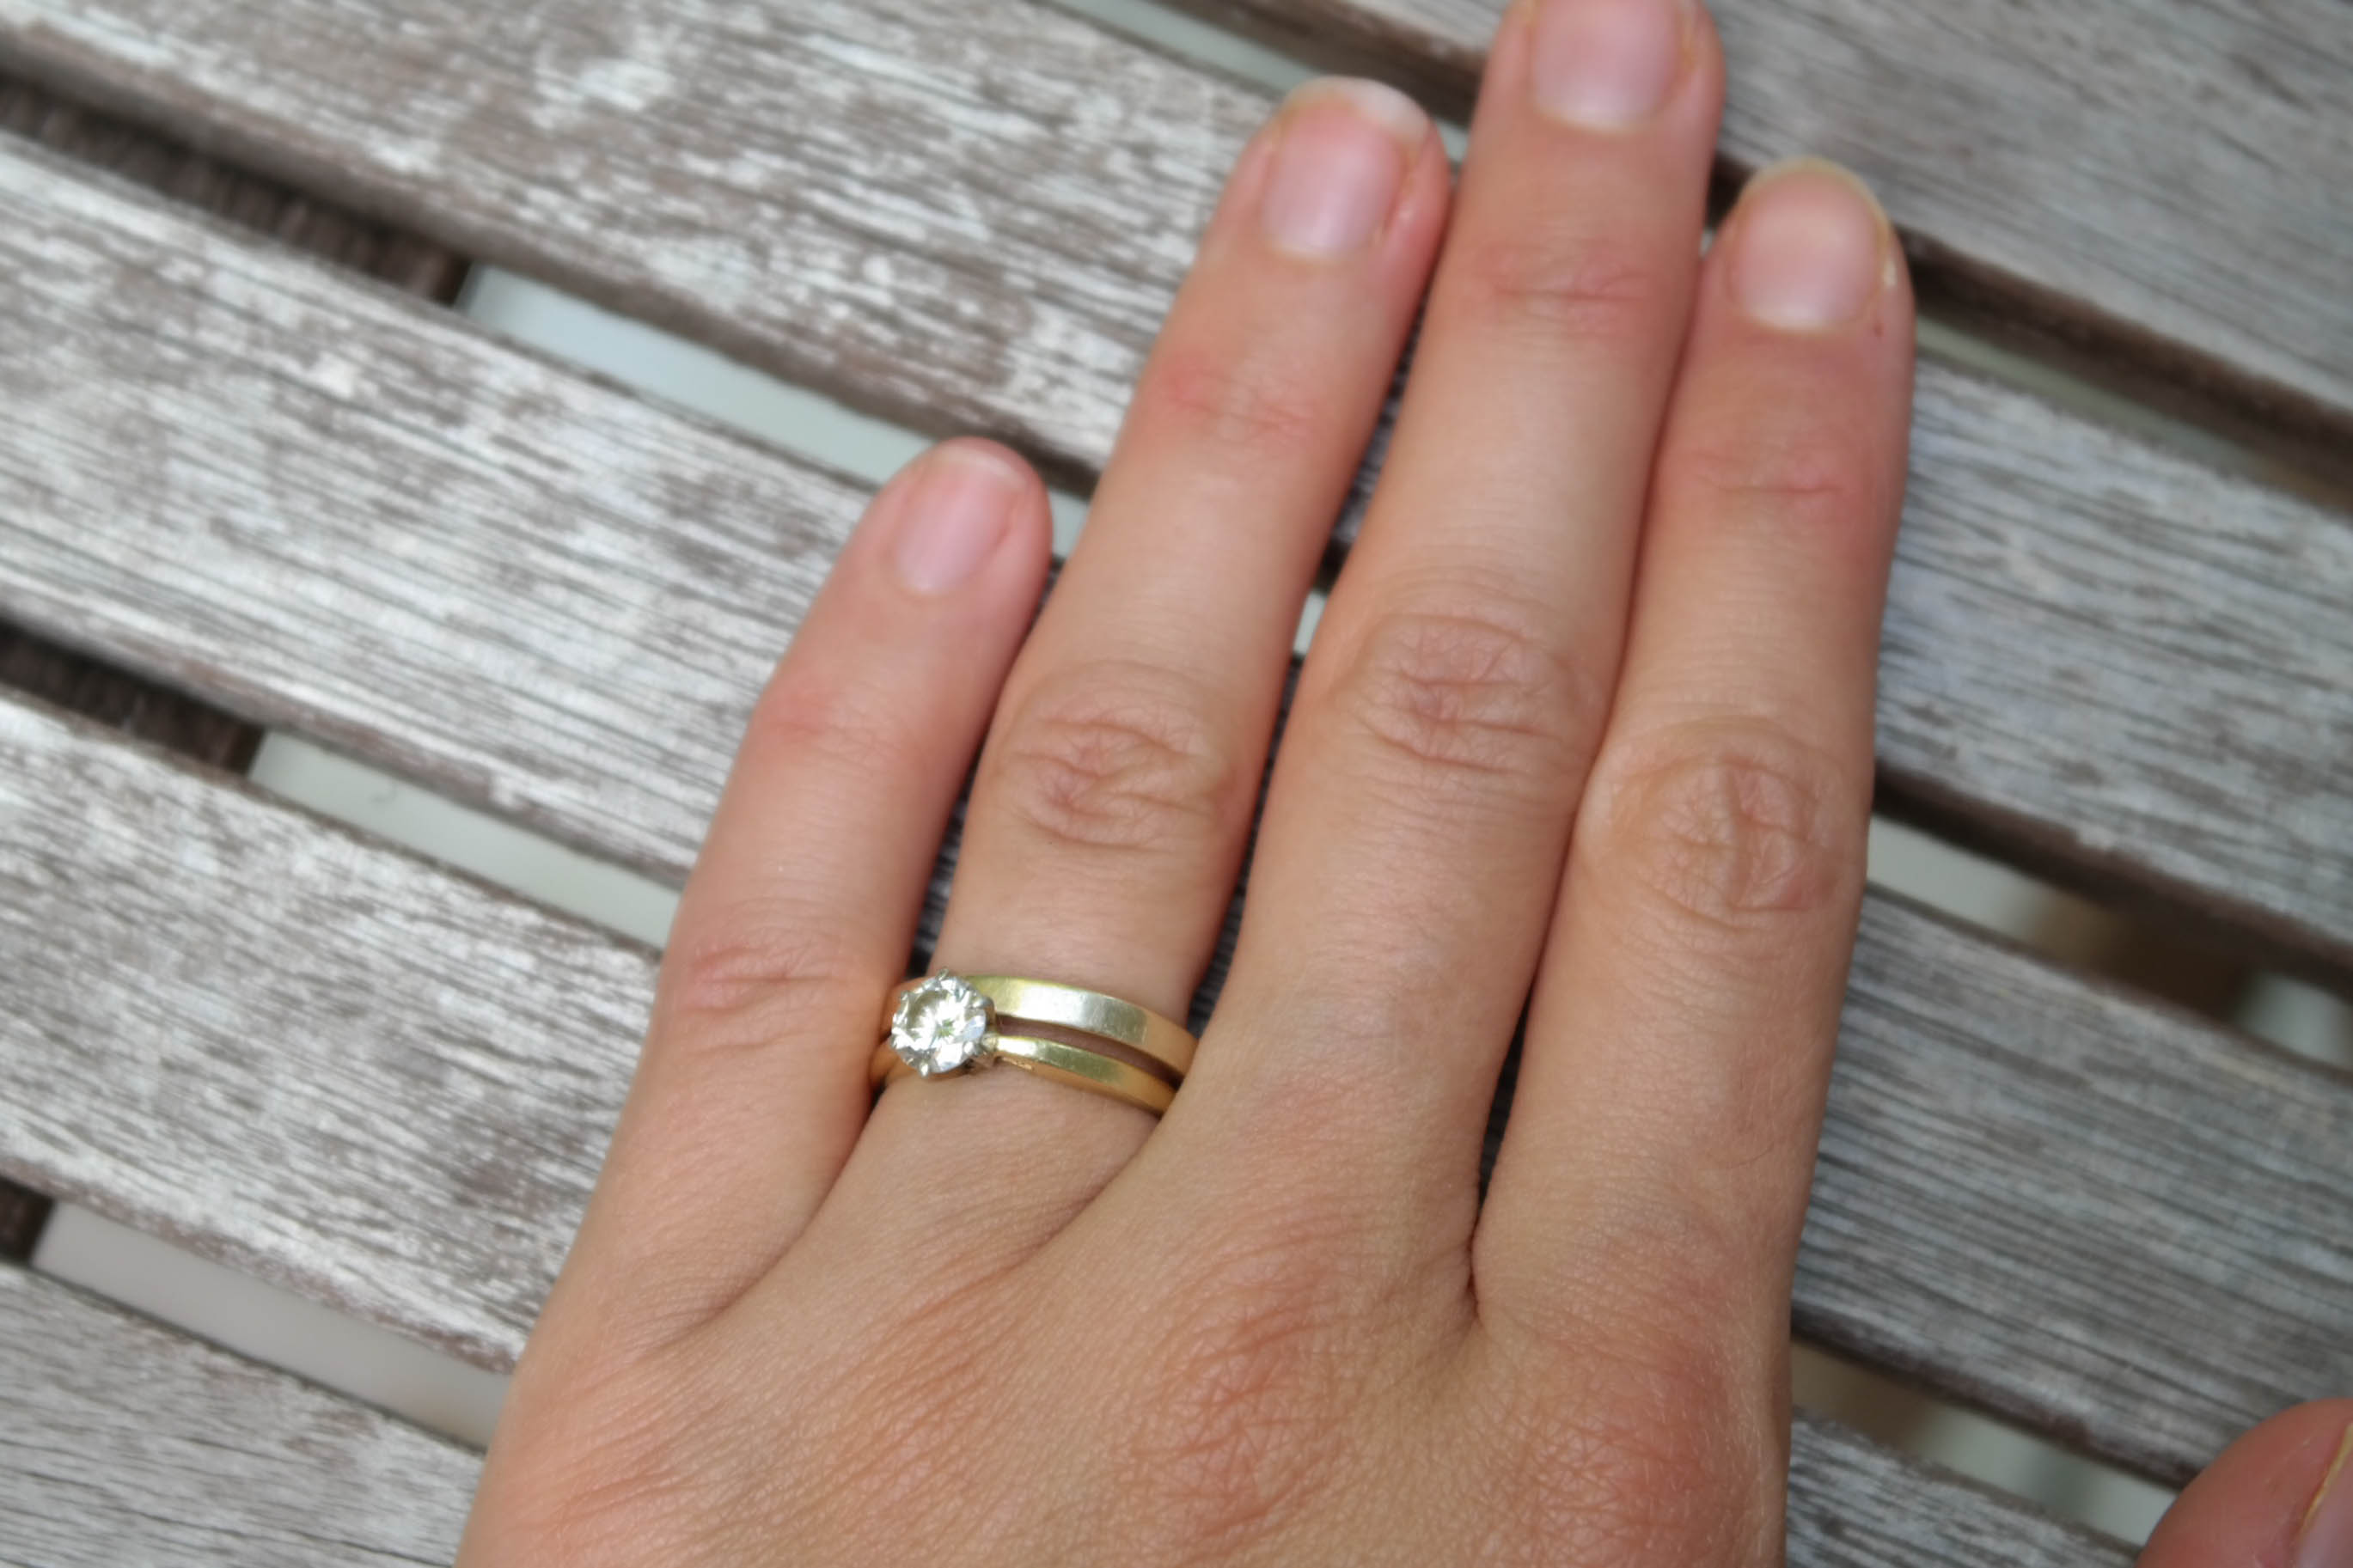 Why I Don't Wear My Engagement Ring | HuffPost